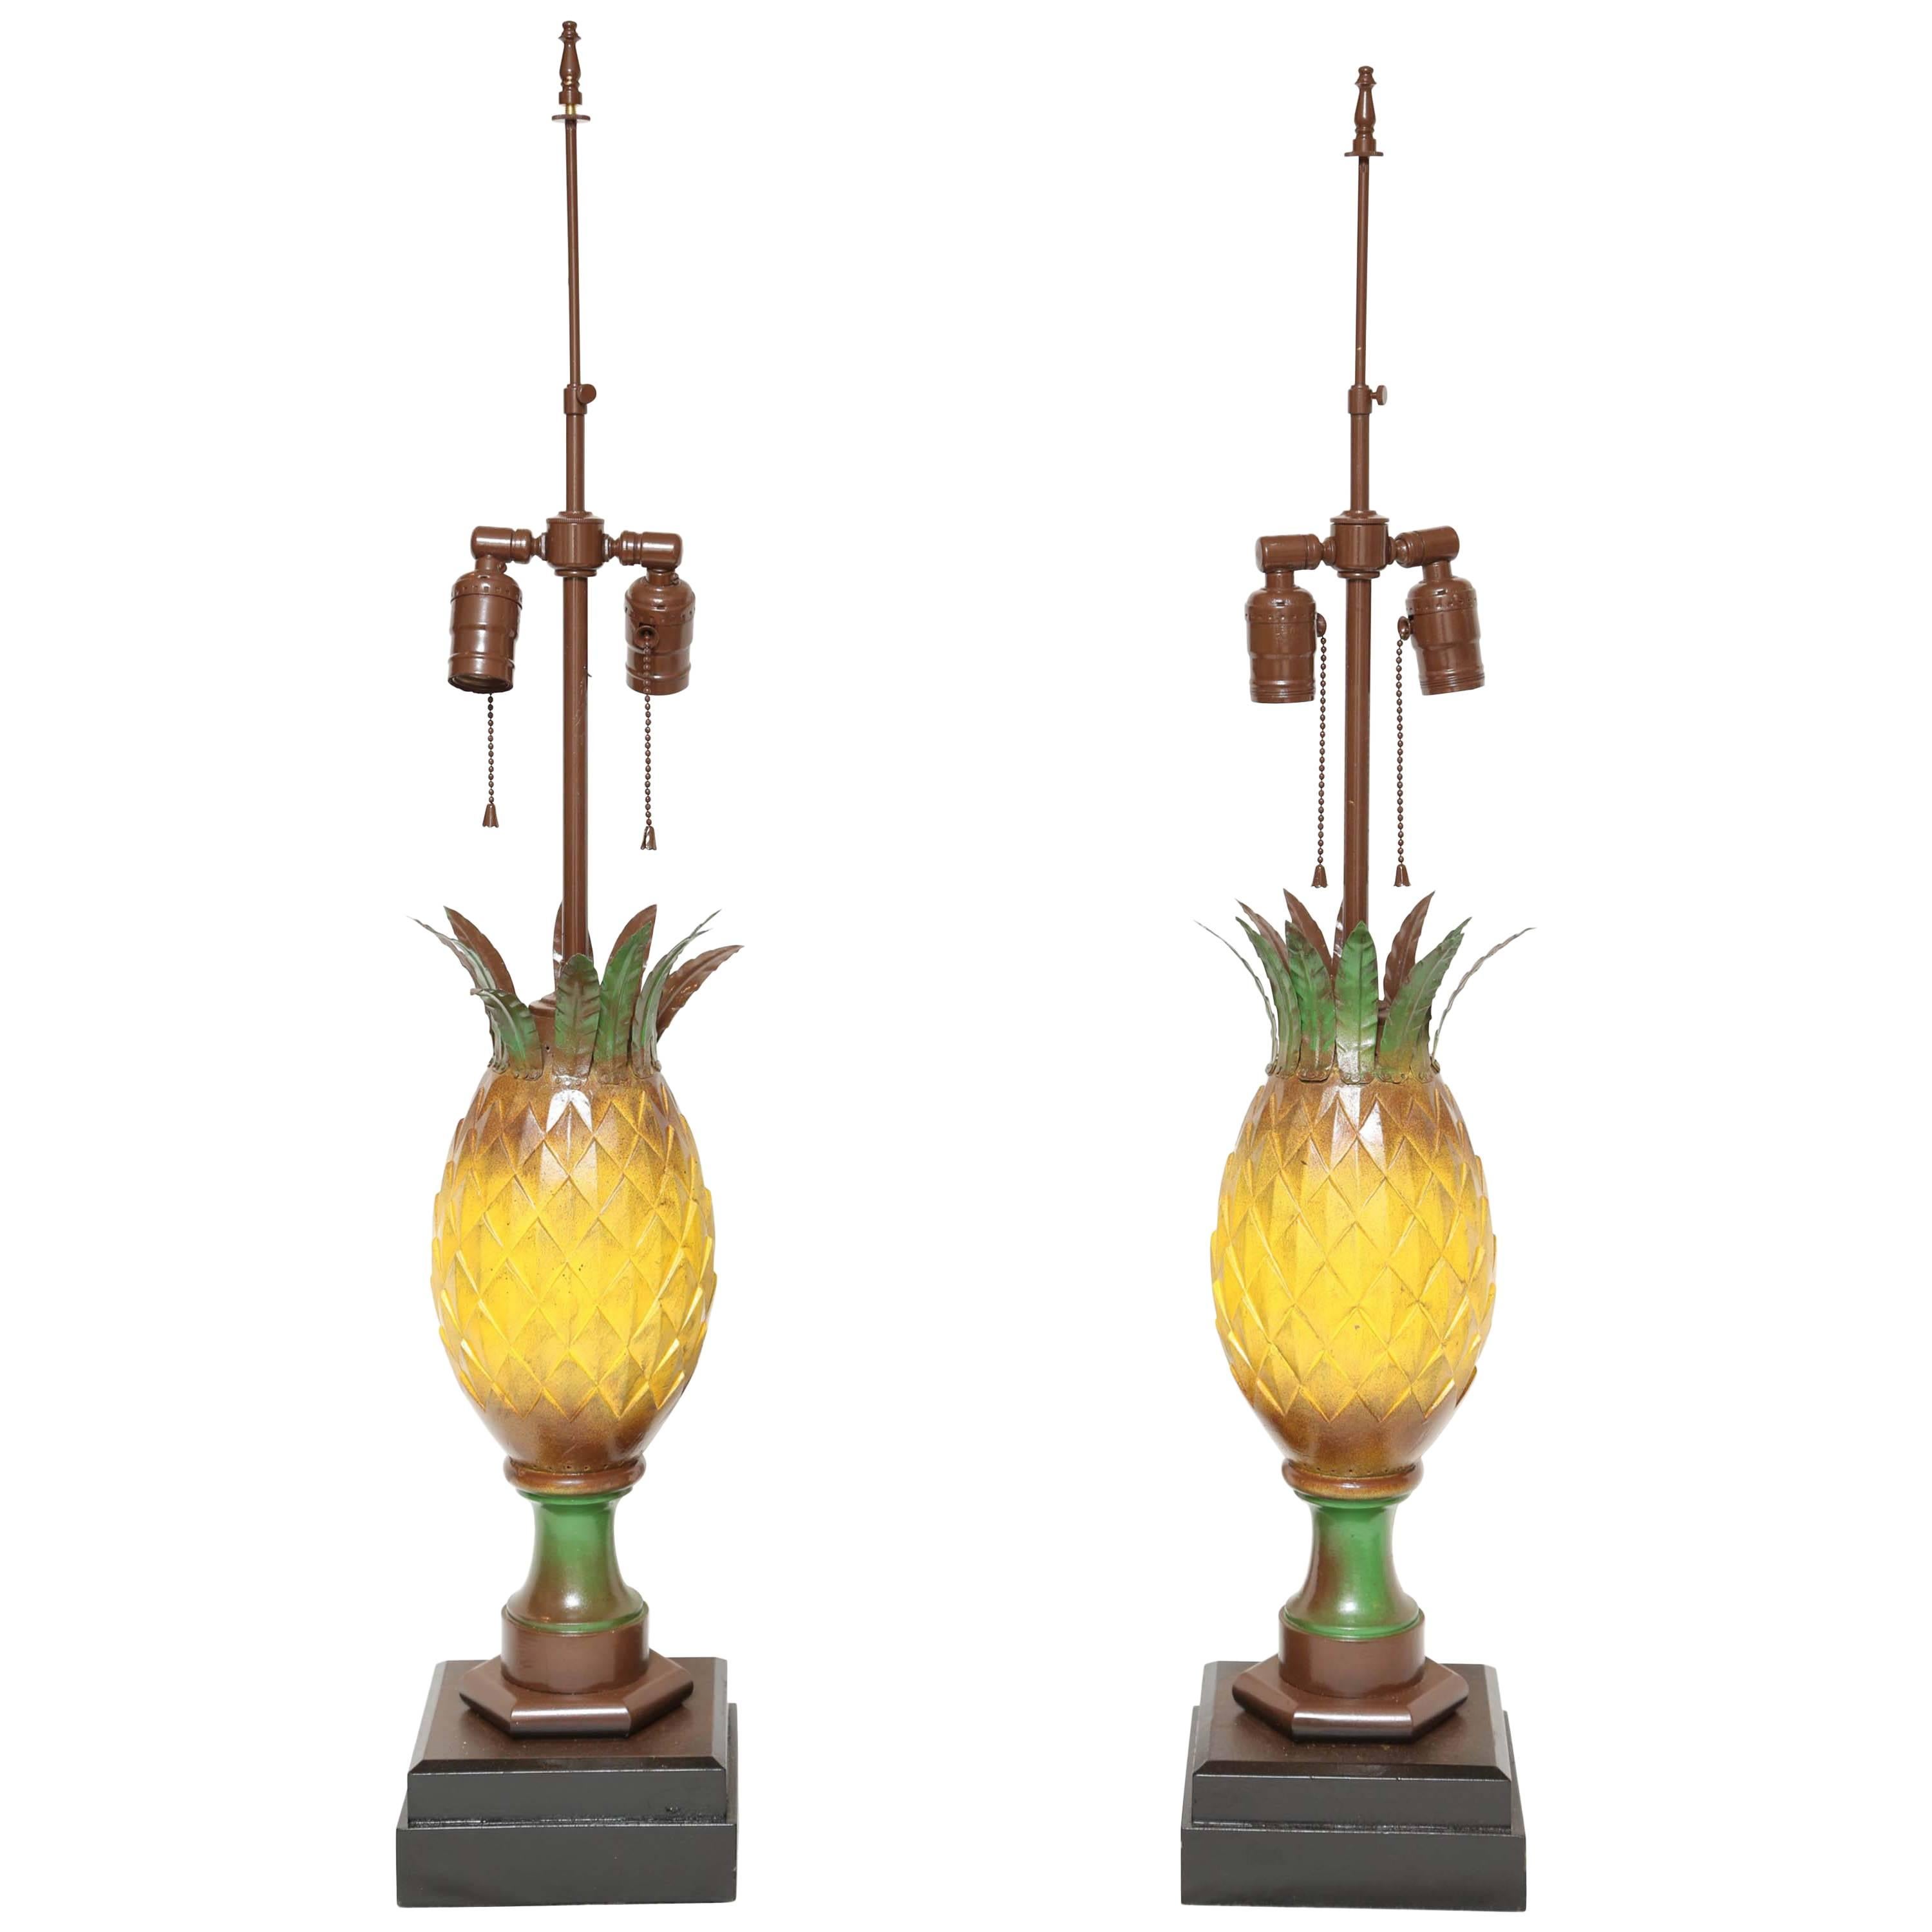 Pair of Tole Appointed Pineapple Table Lamps